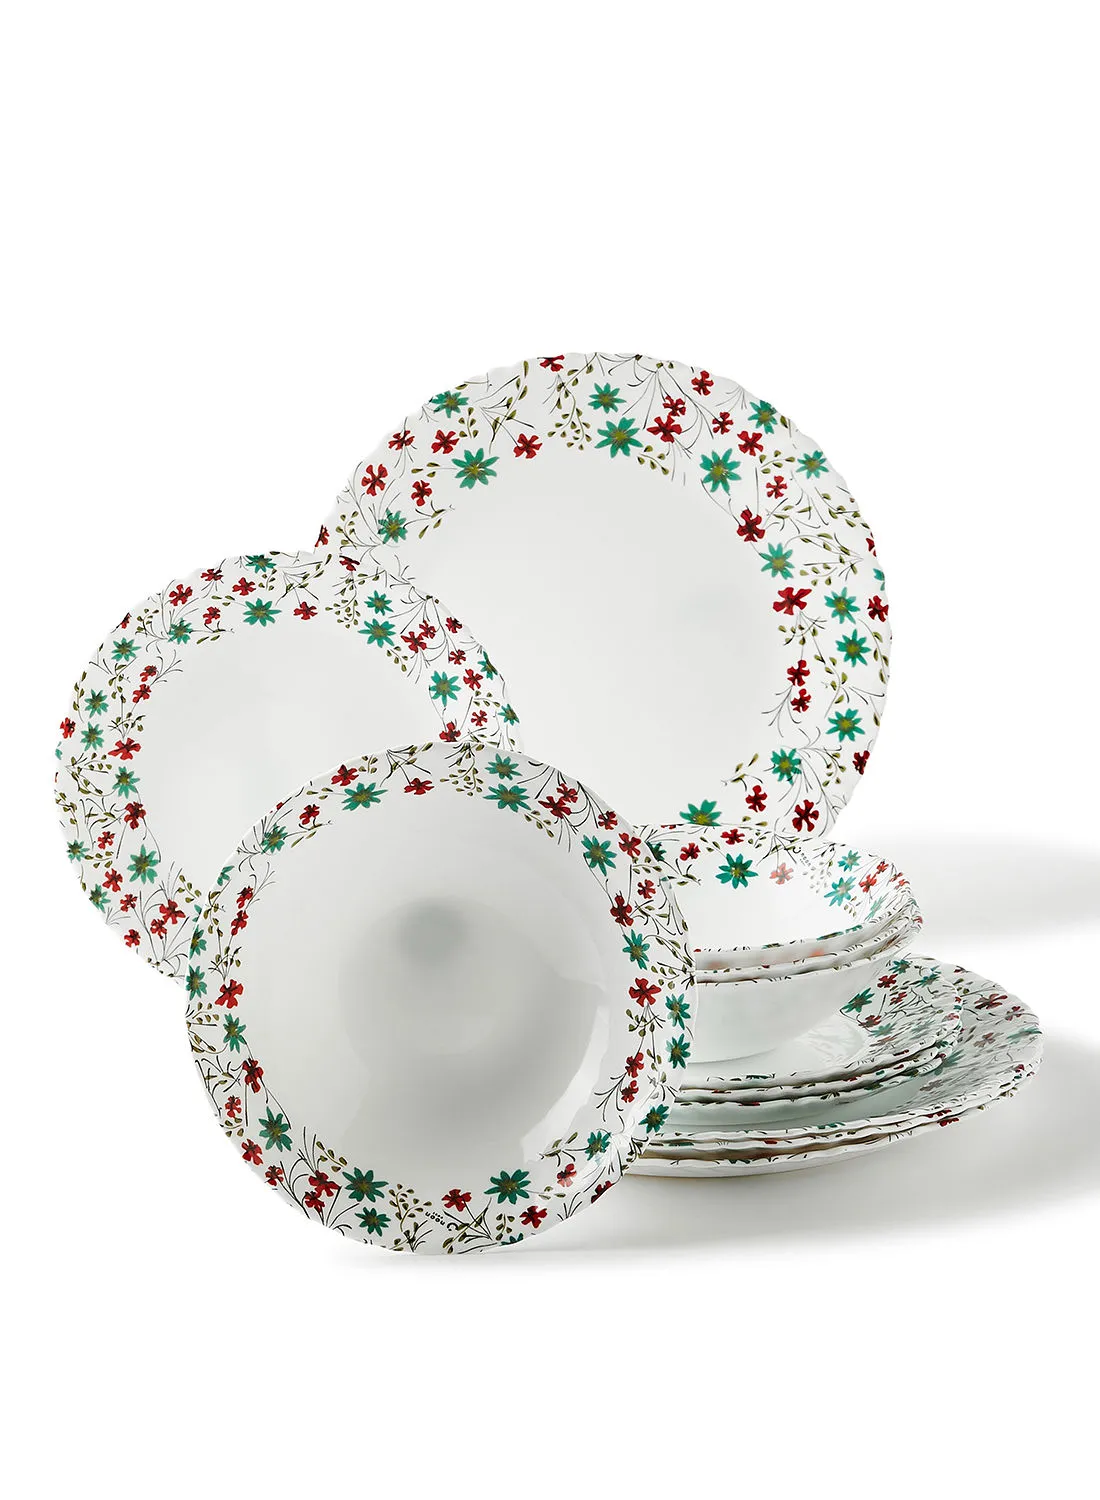 noon east 12 Piece Opalware Dinner Set For Everyday Use - Light Weight Dishes, Plates - Dinner Plate, Side Plate, Bowl - Serves 4 - Printed Design Ektor